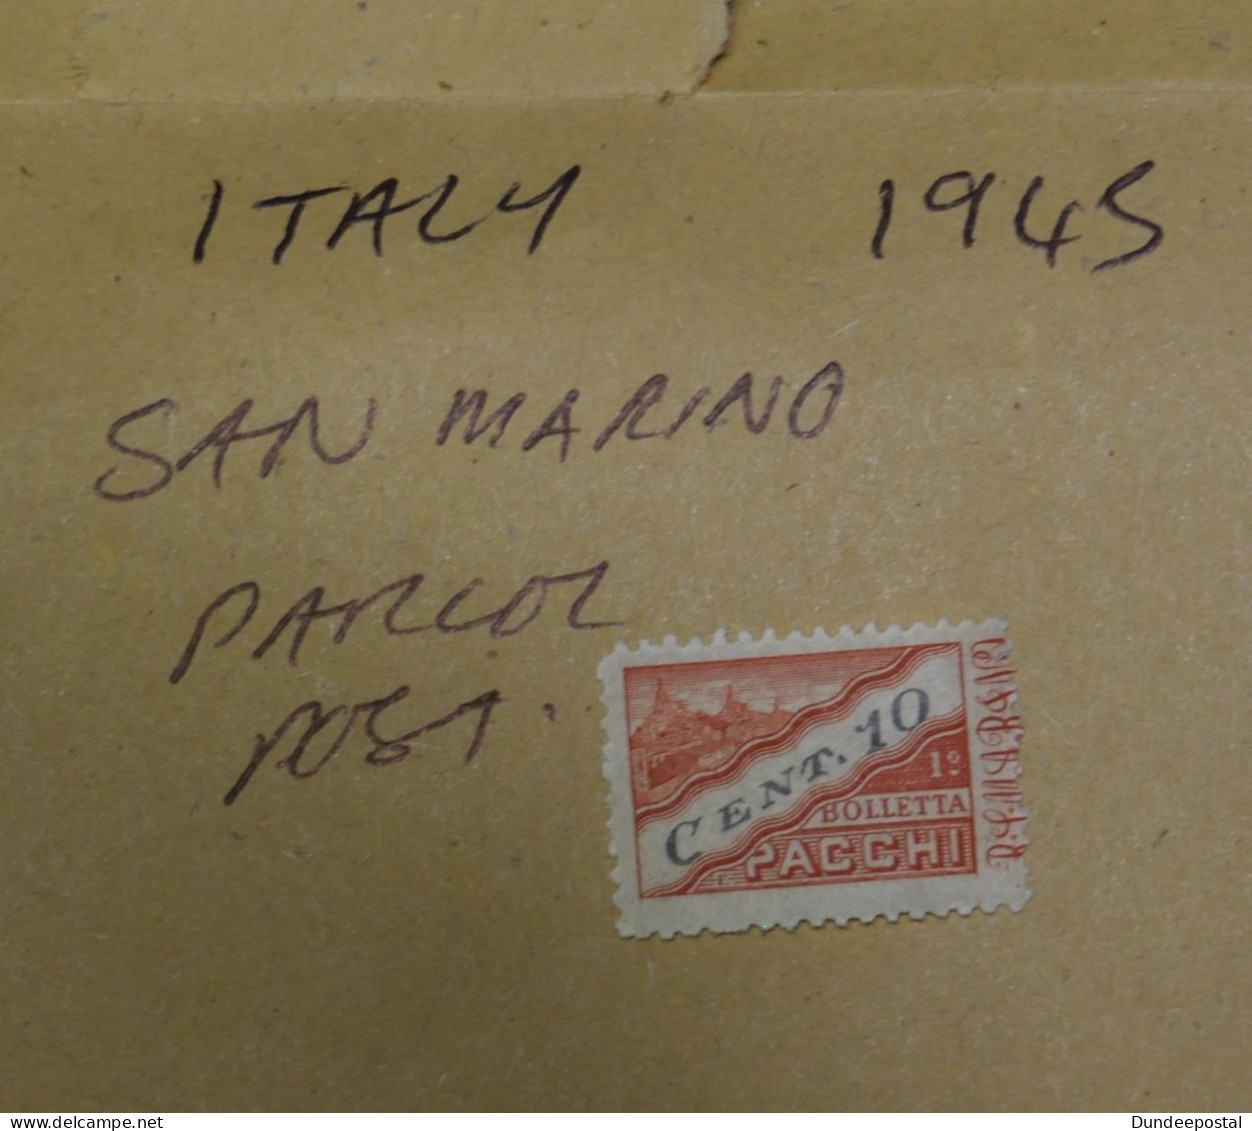 ITALY  STAMPS  San Marino Parcel Post 1945 ~~L@@K~~ - Paquetes Postales